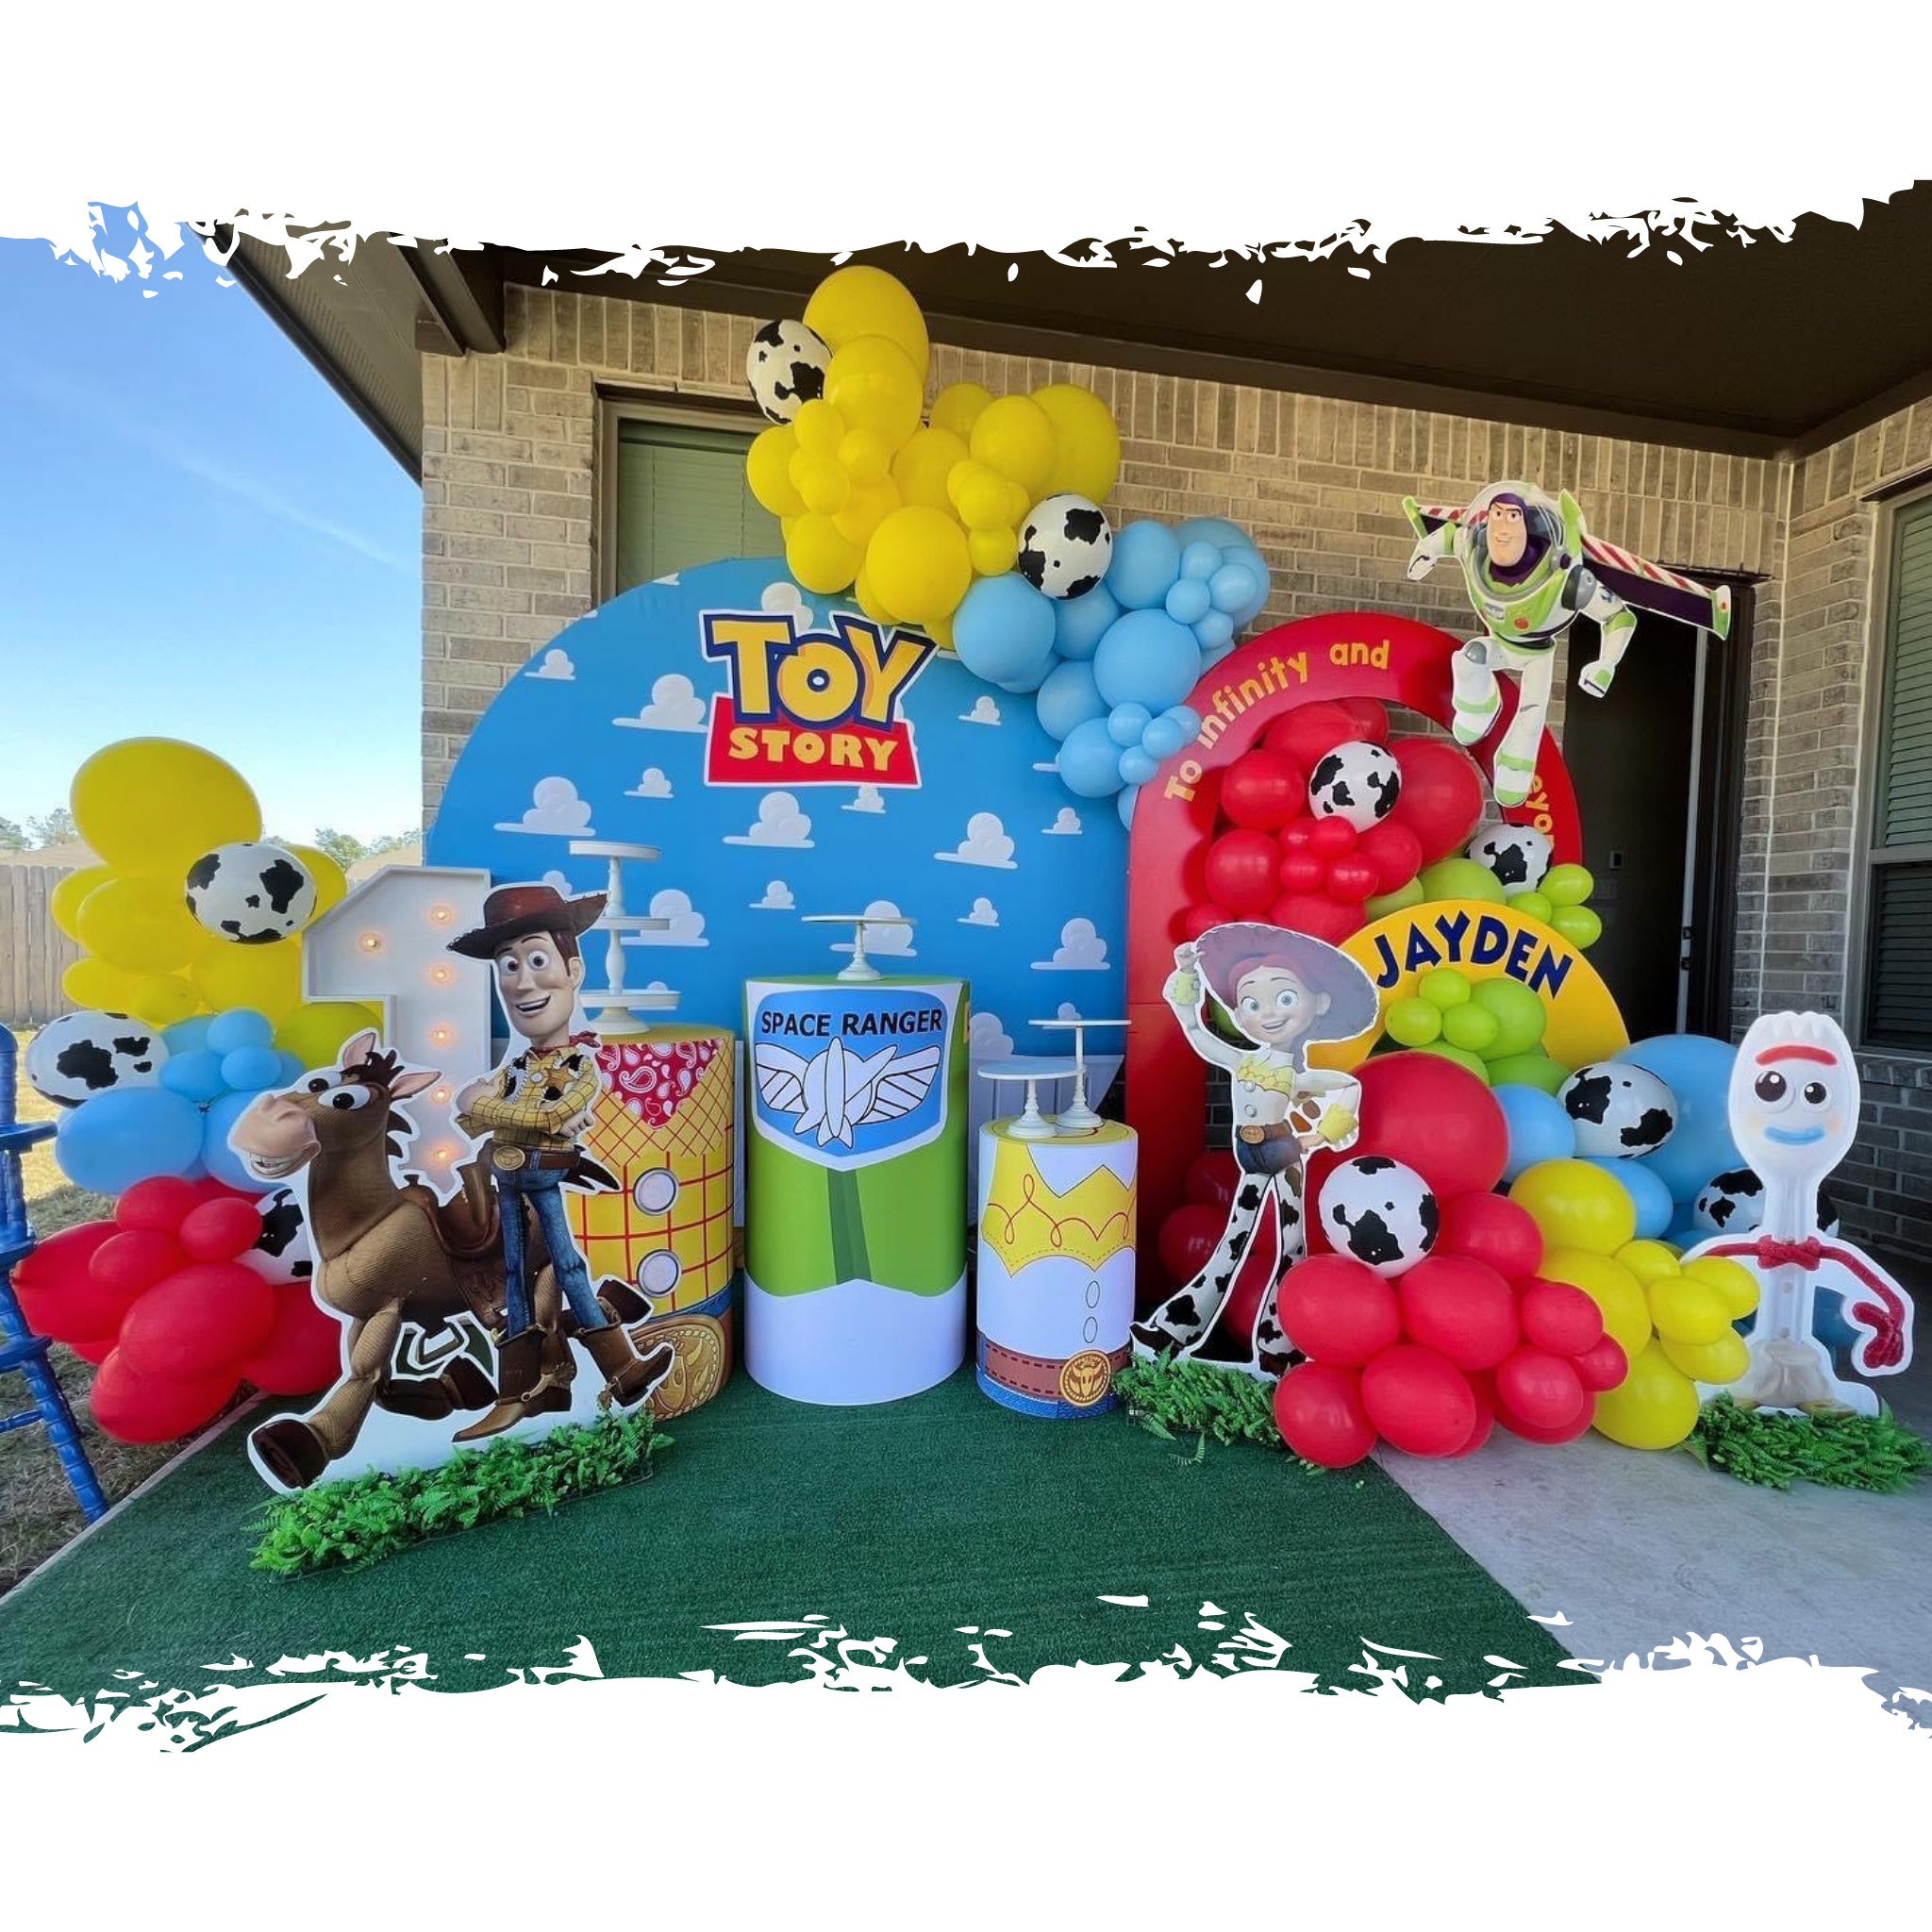 Toy Story 1st Birthday Party Supplies and Balloon Bouquet Decorations